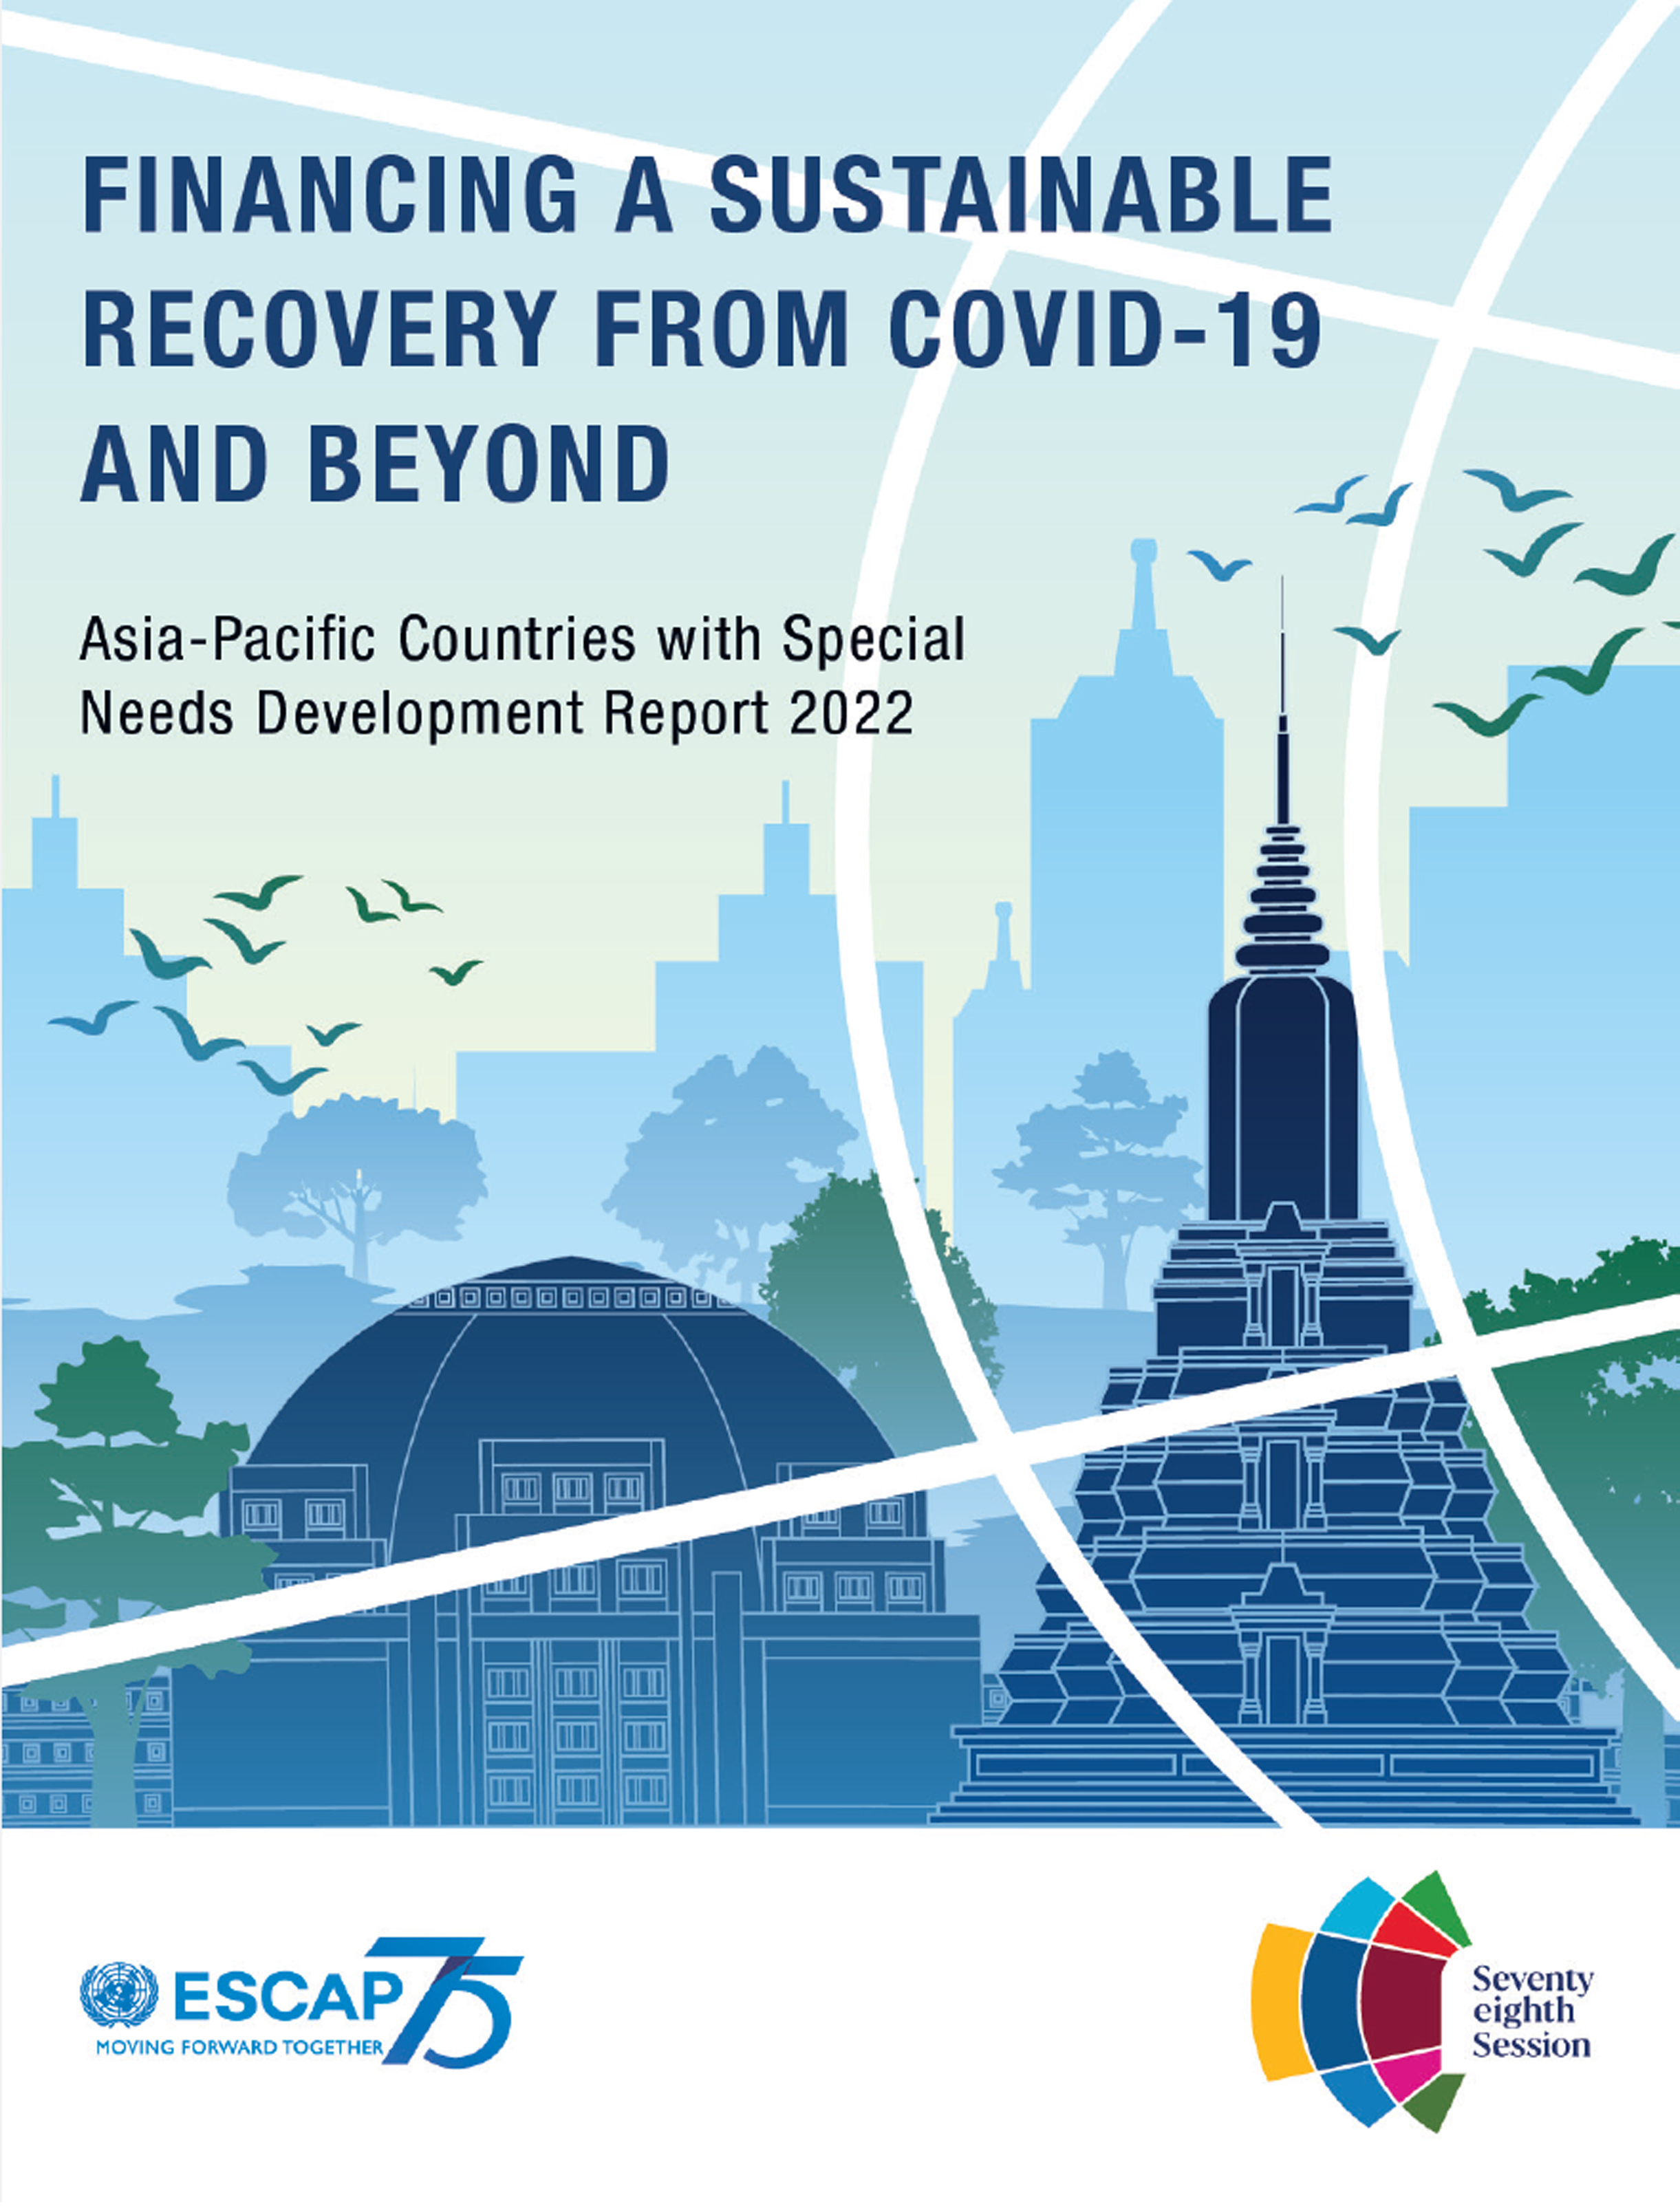 image of Asia-Pacific Countries with Special Needs Development Report 2022